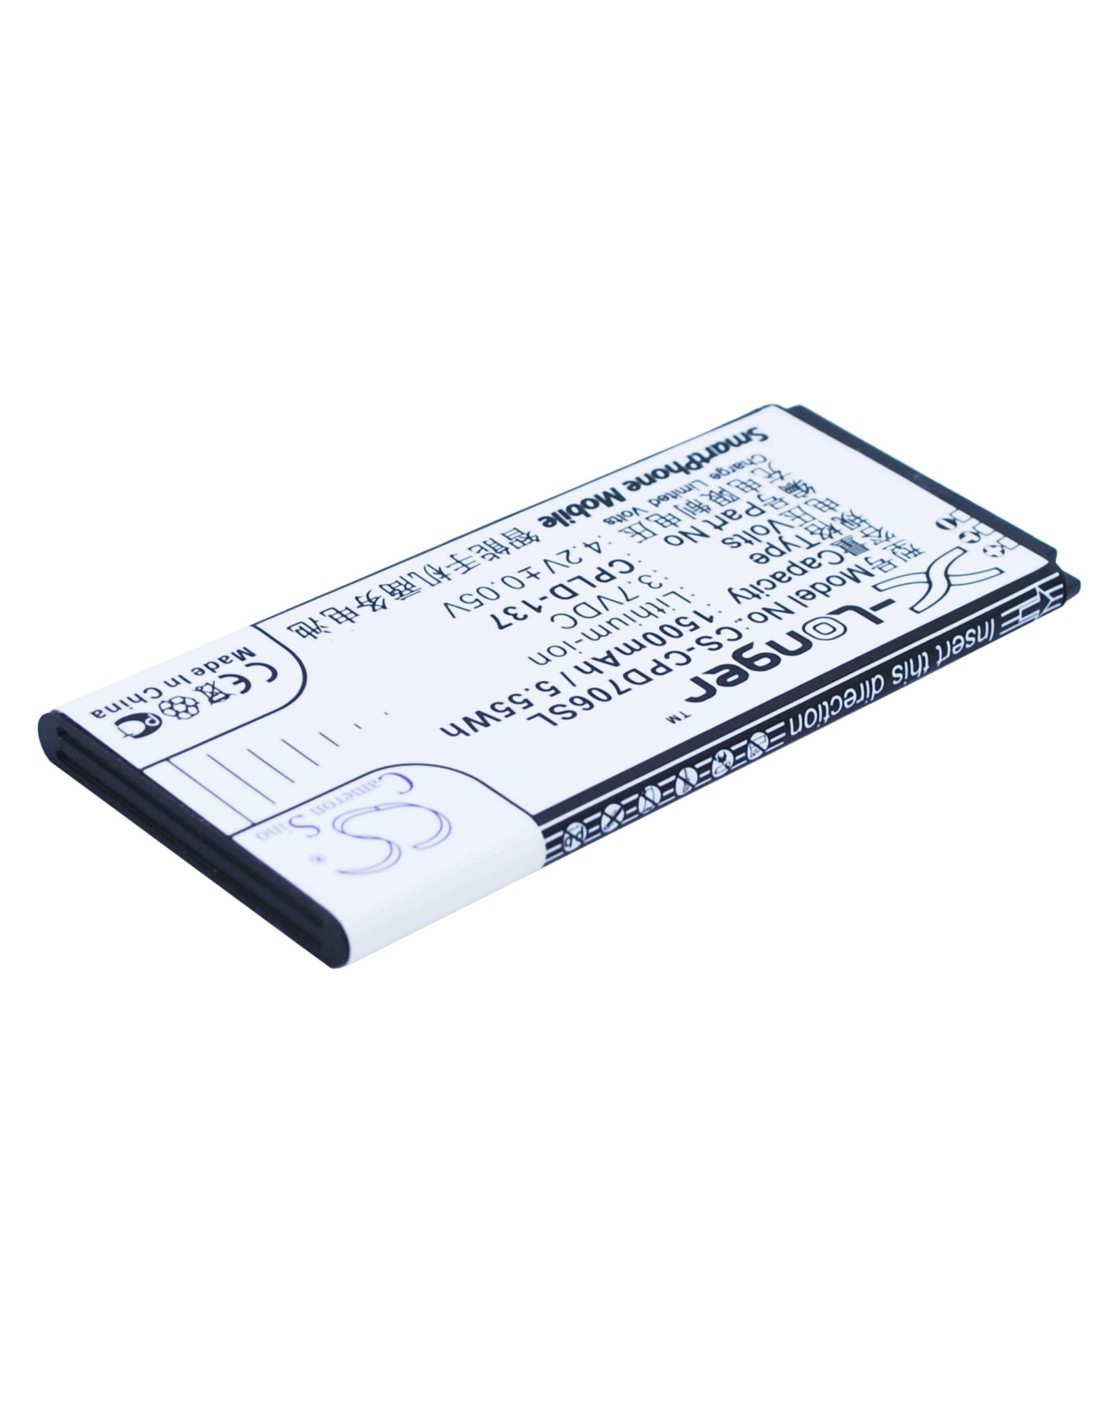 Battery for Coolpad 7060S 3.7V, 1500mAh - 5.55Wh